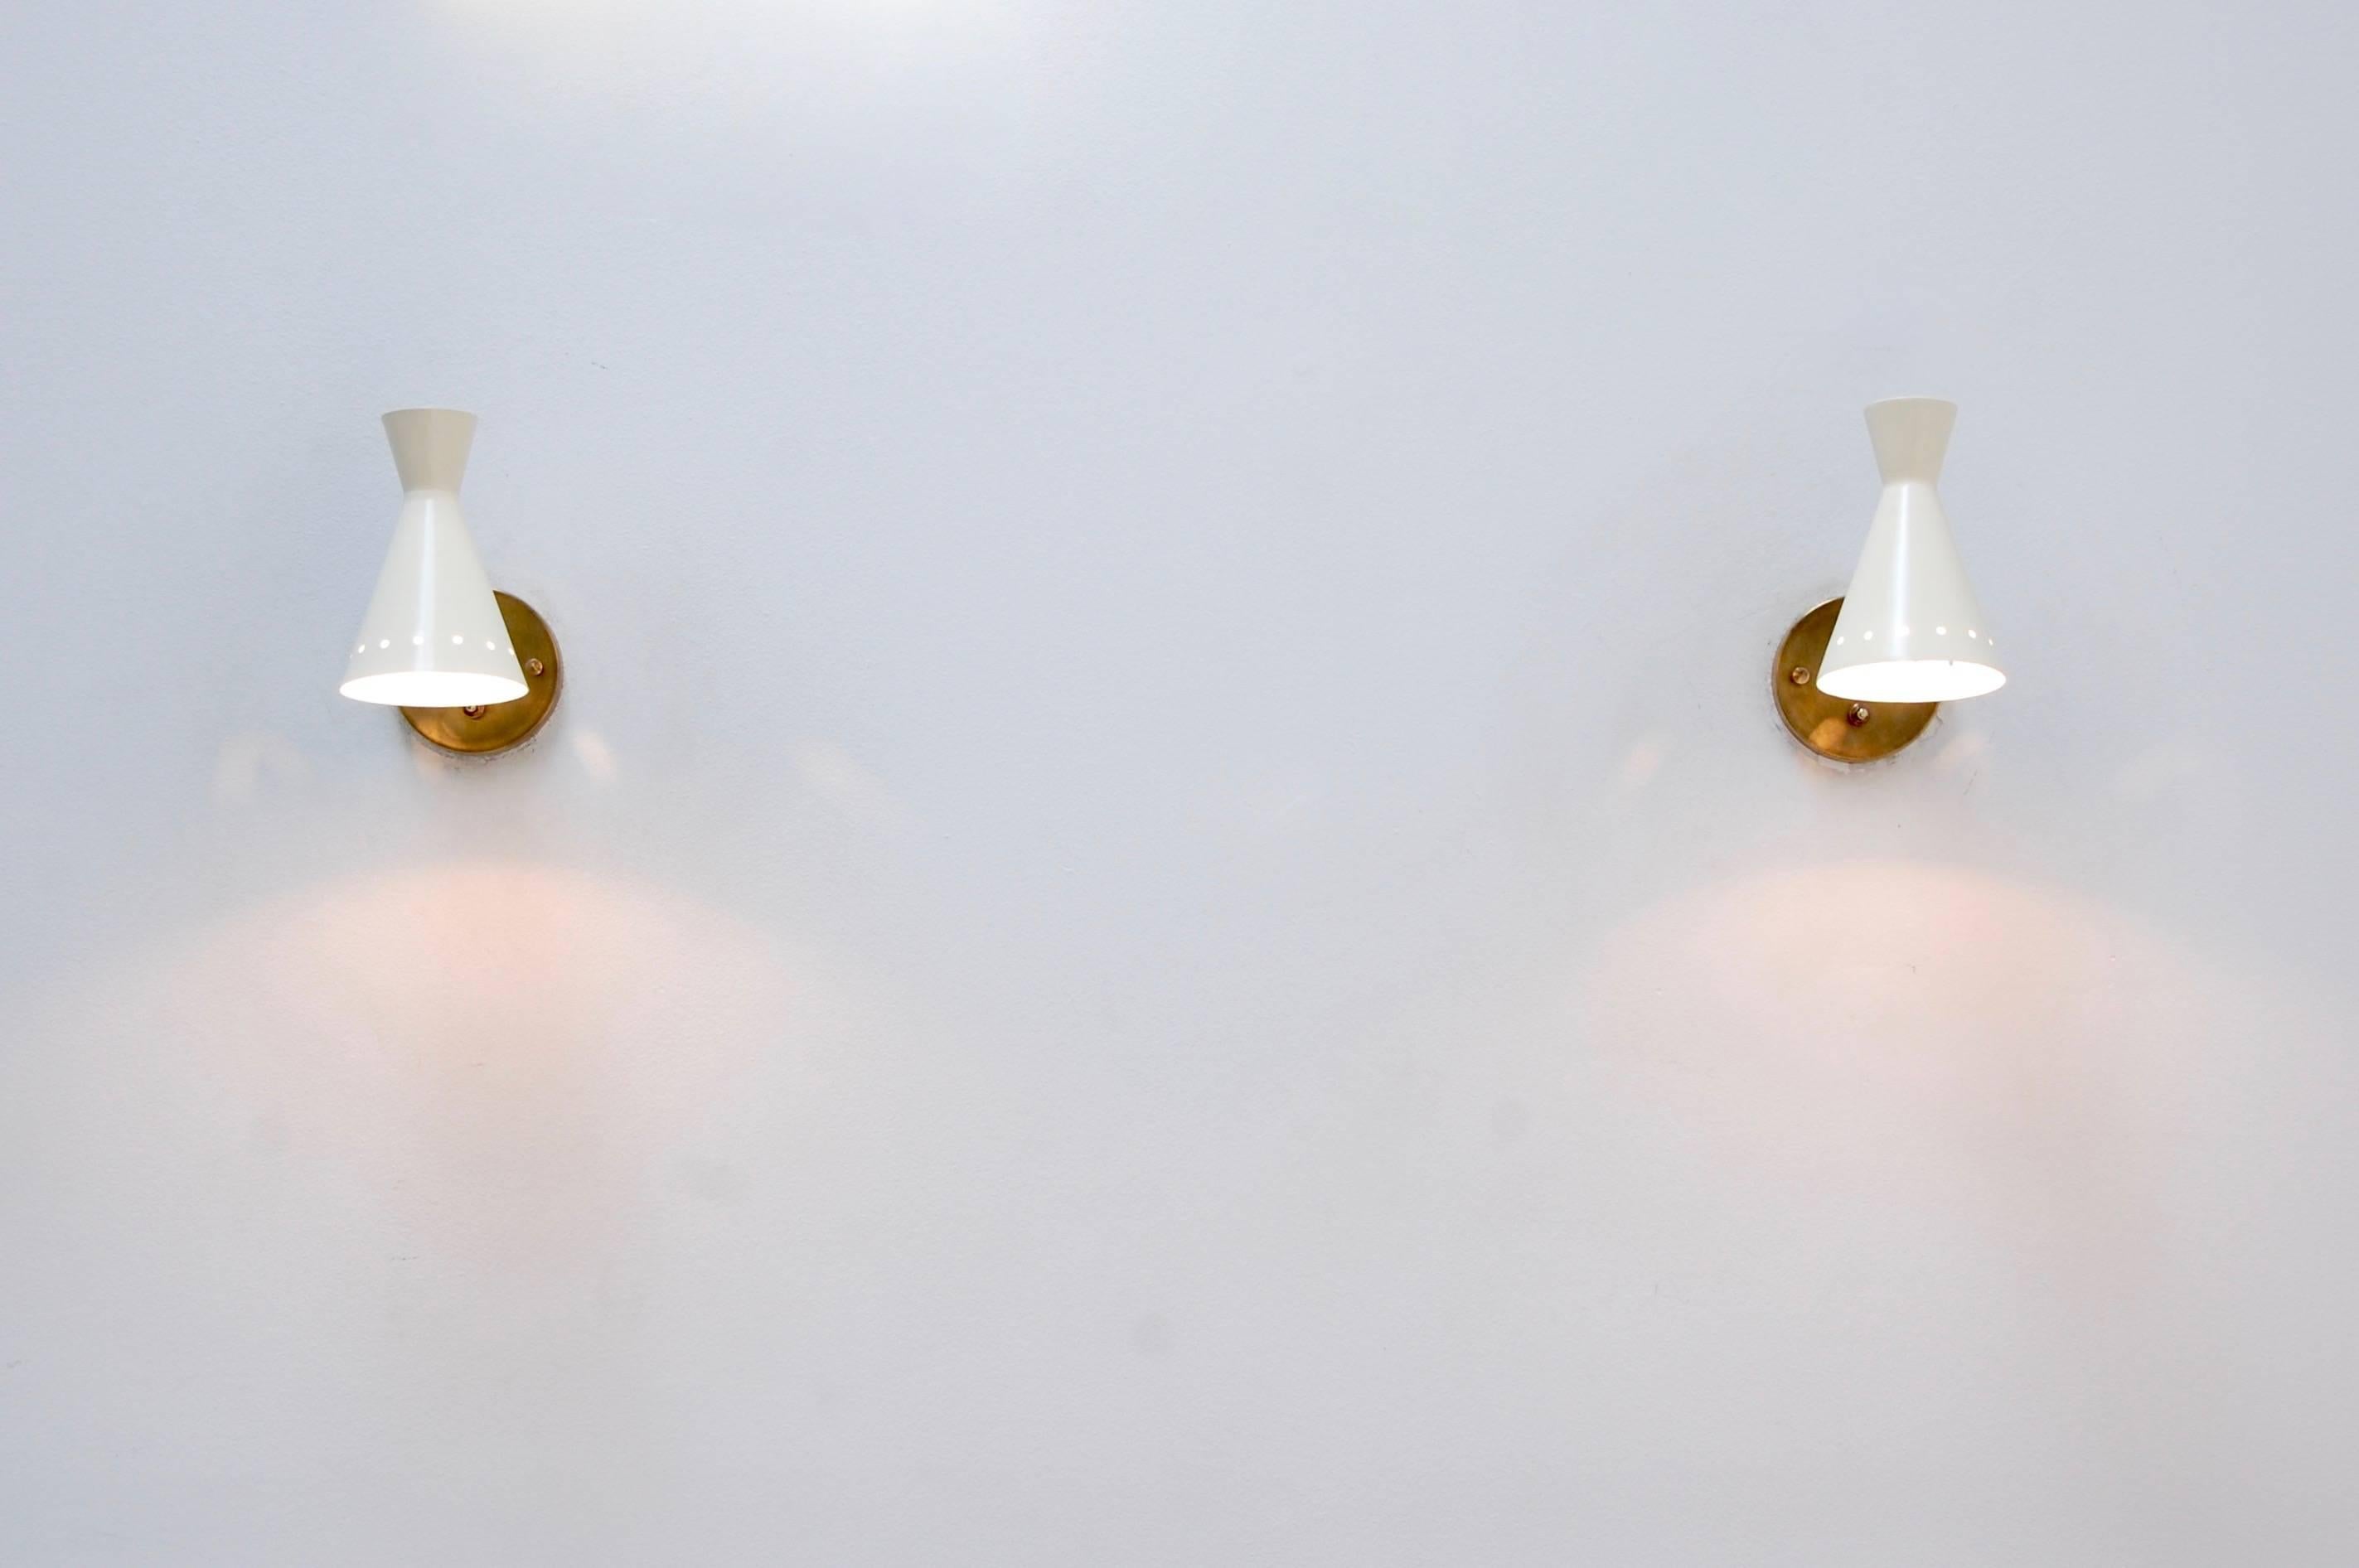 Perforated Articulating Sconce In Excellent Condition For Sale In Los Angeles, CA